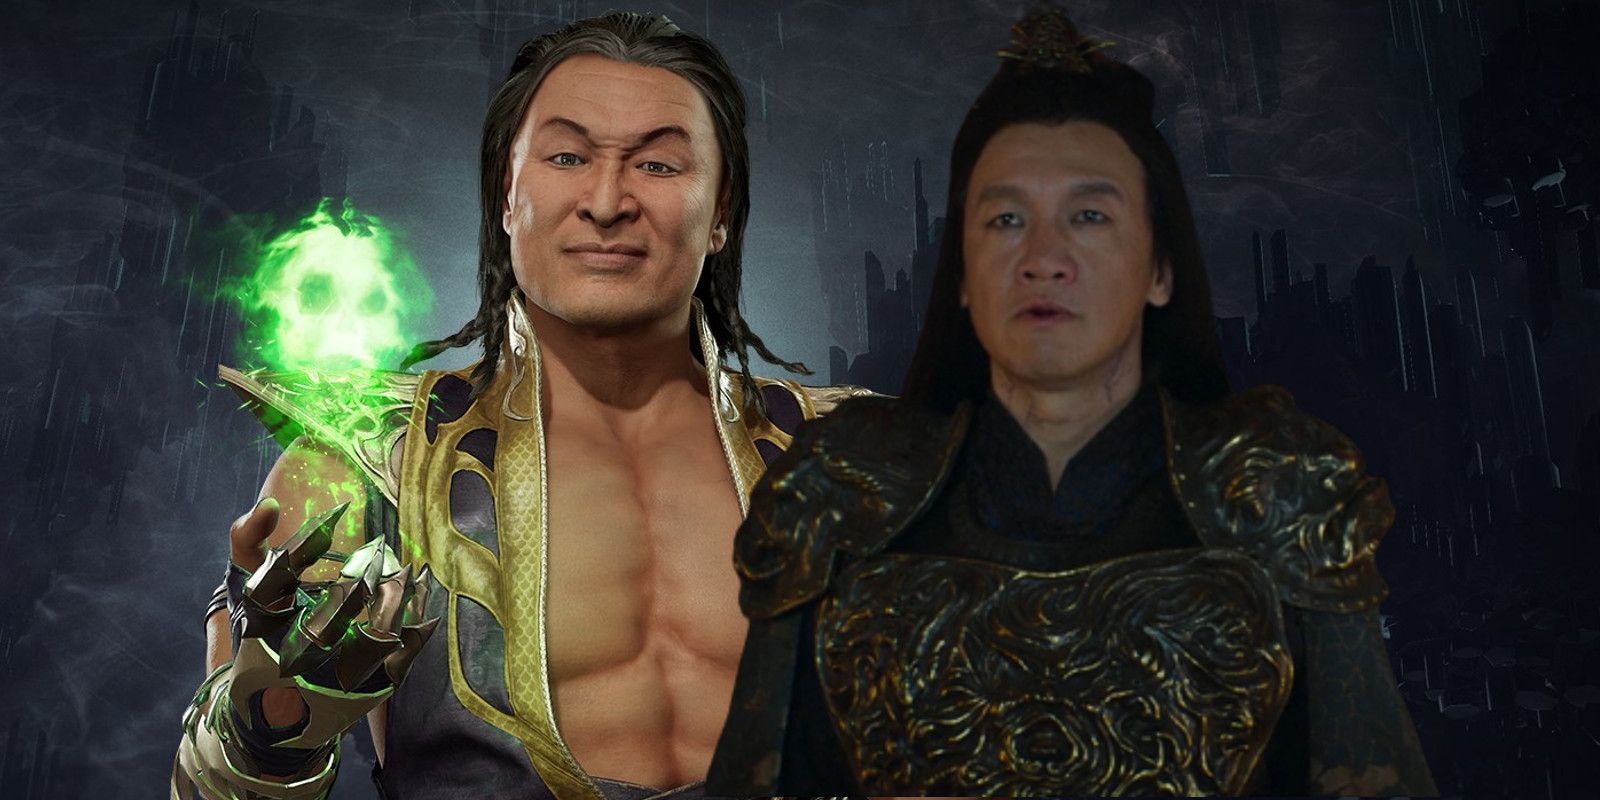 Mortal Kombat Shang Tsung in 2021 movie and in game